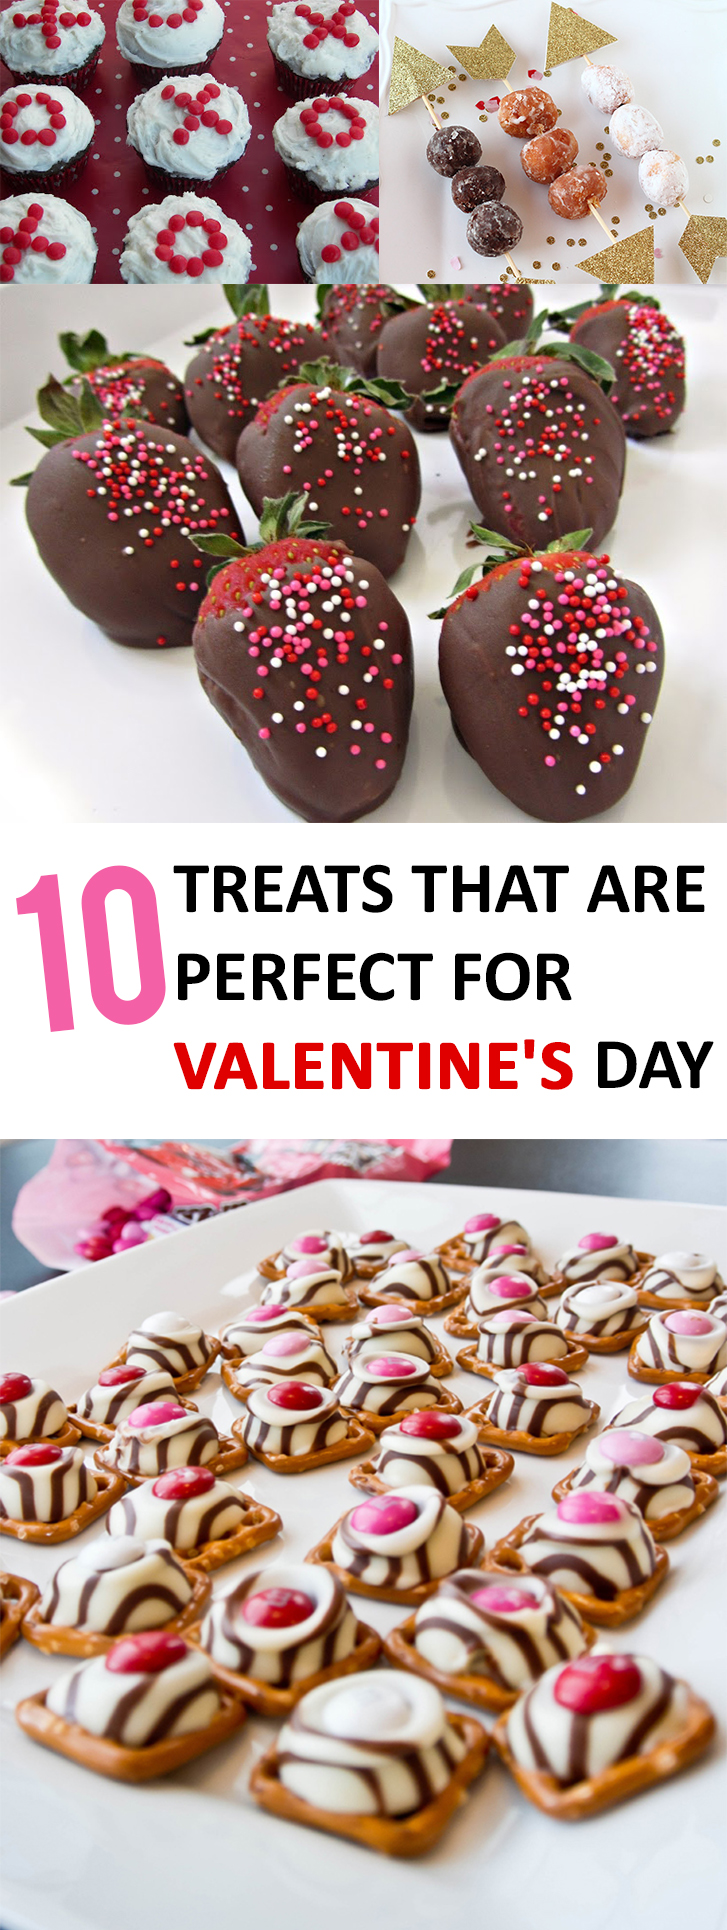 10 Treats that are Perfect for Valentine’s Day